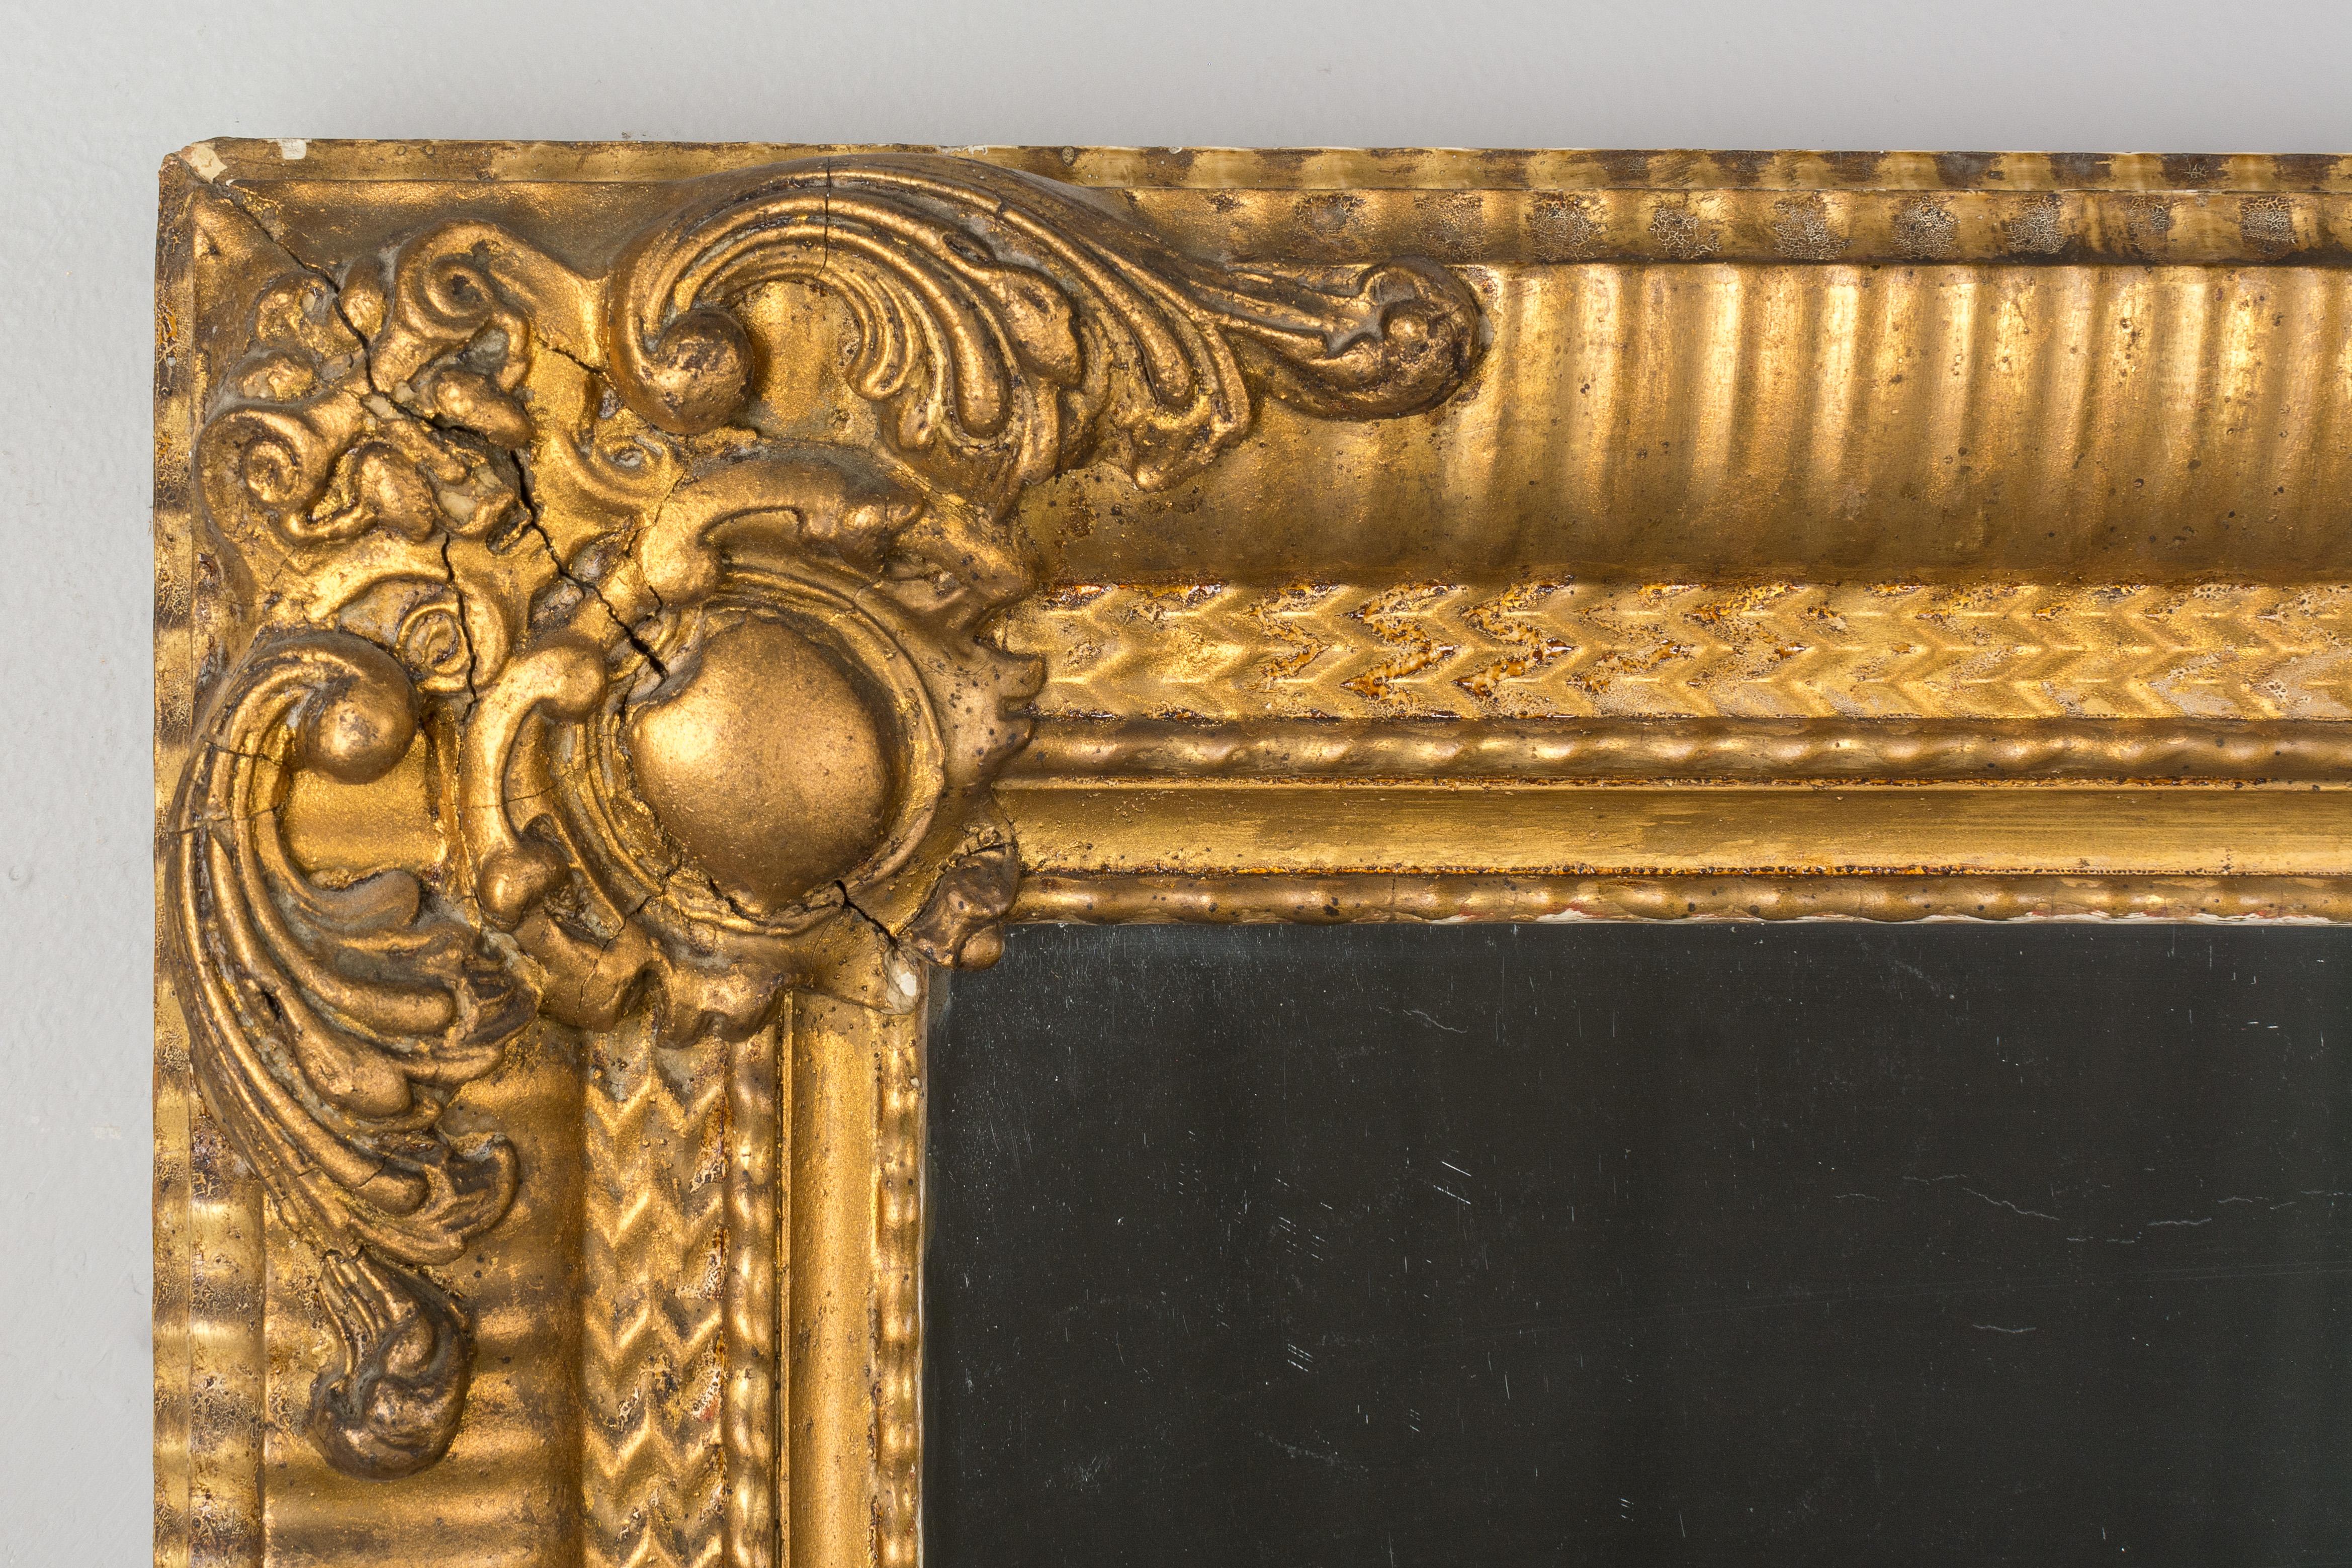 A 19th century French Louis Philippe style giltwood and gesso mirror with three inch wide ribbed frame and corner decorations. Warm gilt finish. Original mirror with old silvering. Minor loss to gilt. Can be hung horizontally or vertically. The